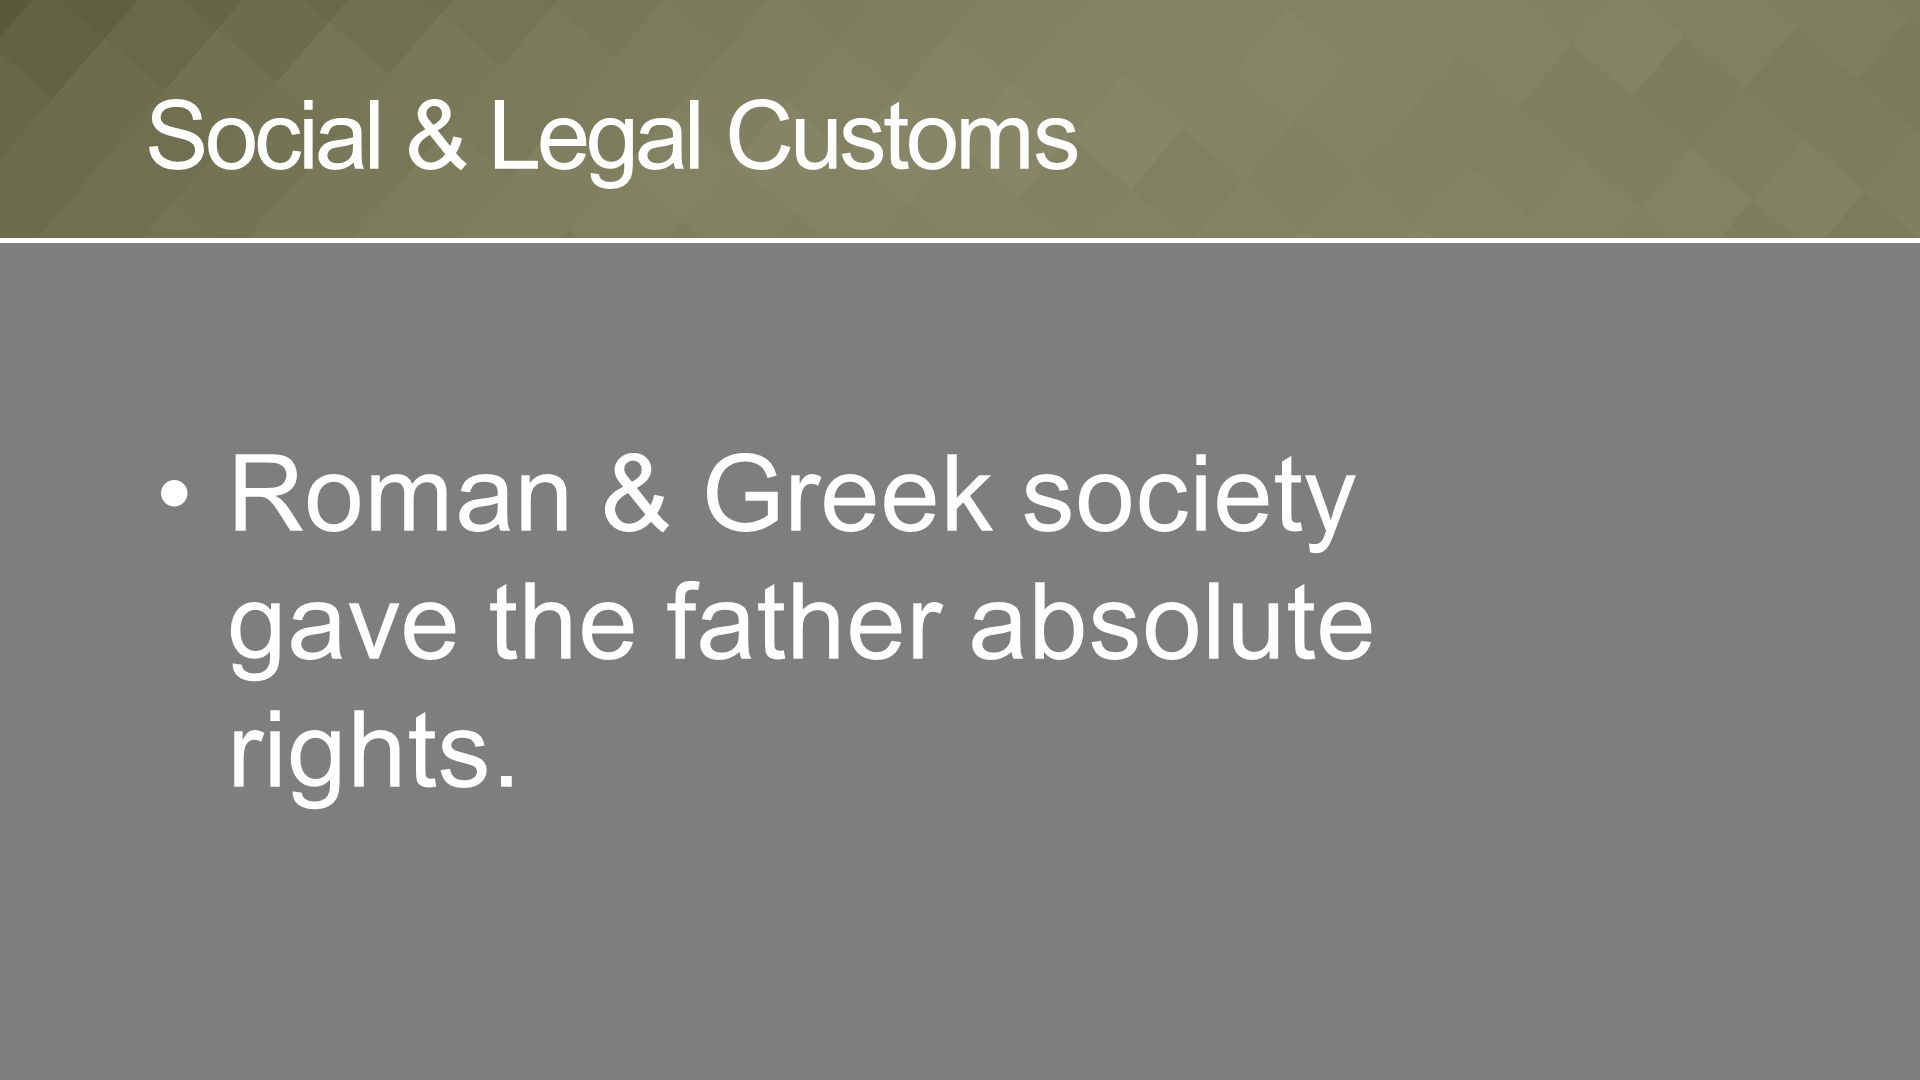 Roman & Greek society gave the father absolute rights. Social & Legal Customs